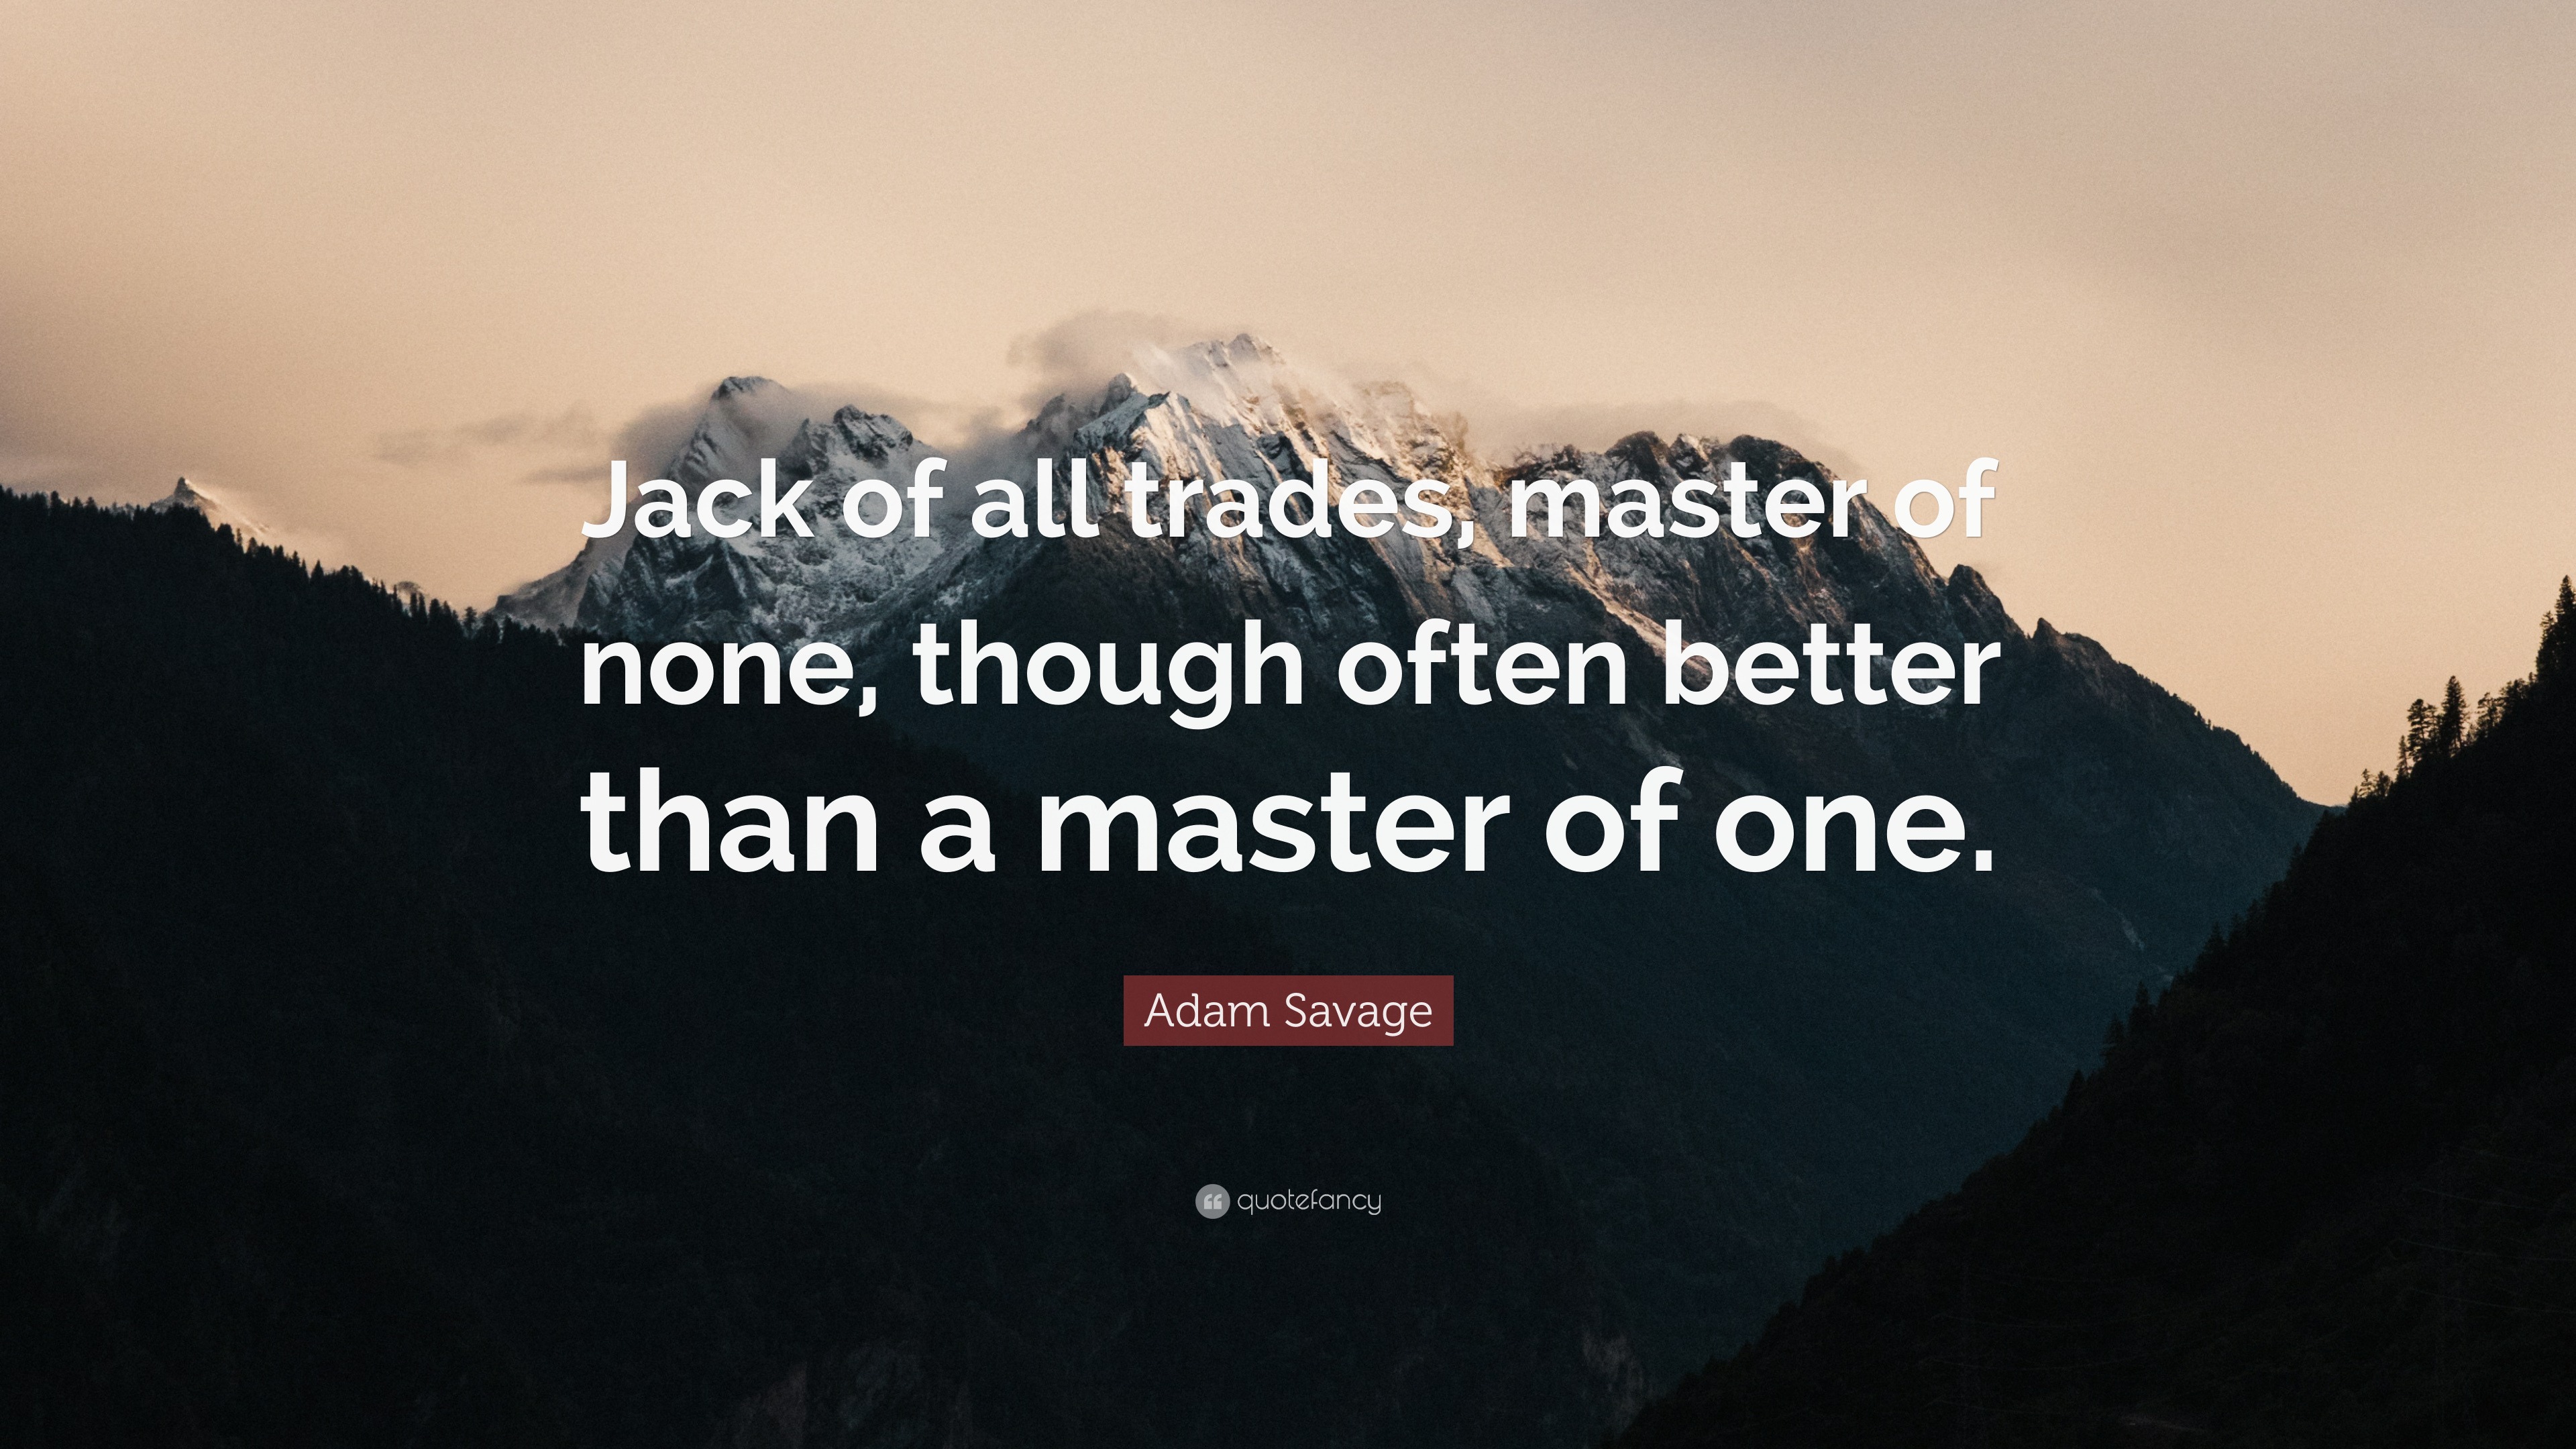 All none of of trades master full quote jack Jack Of